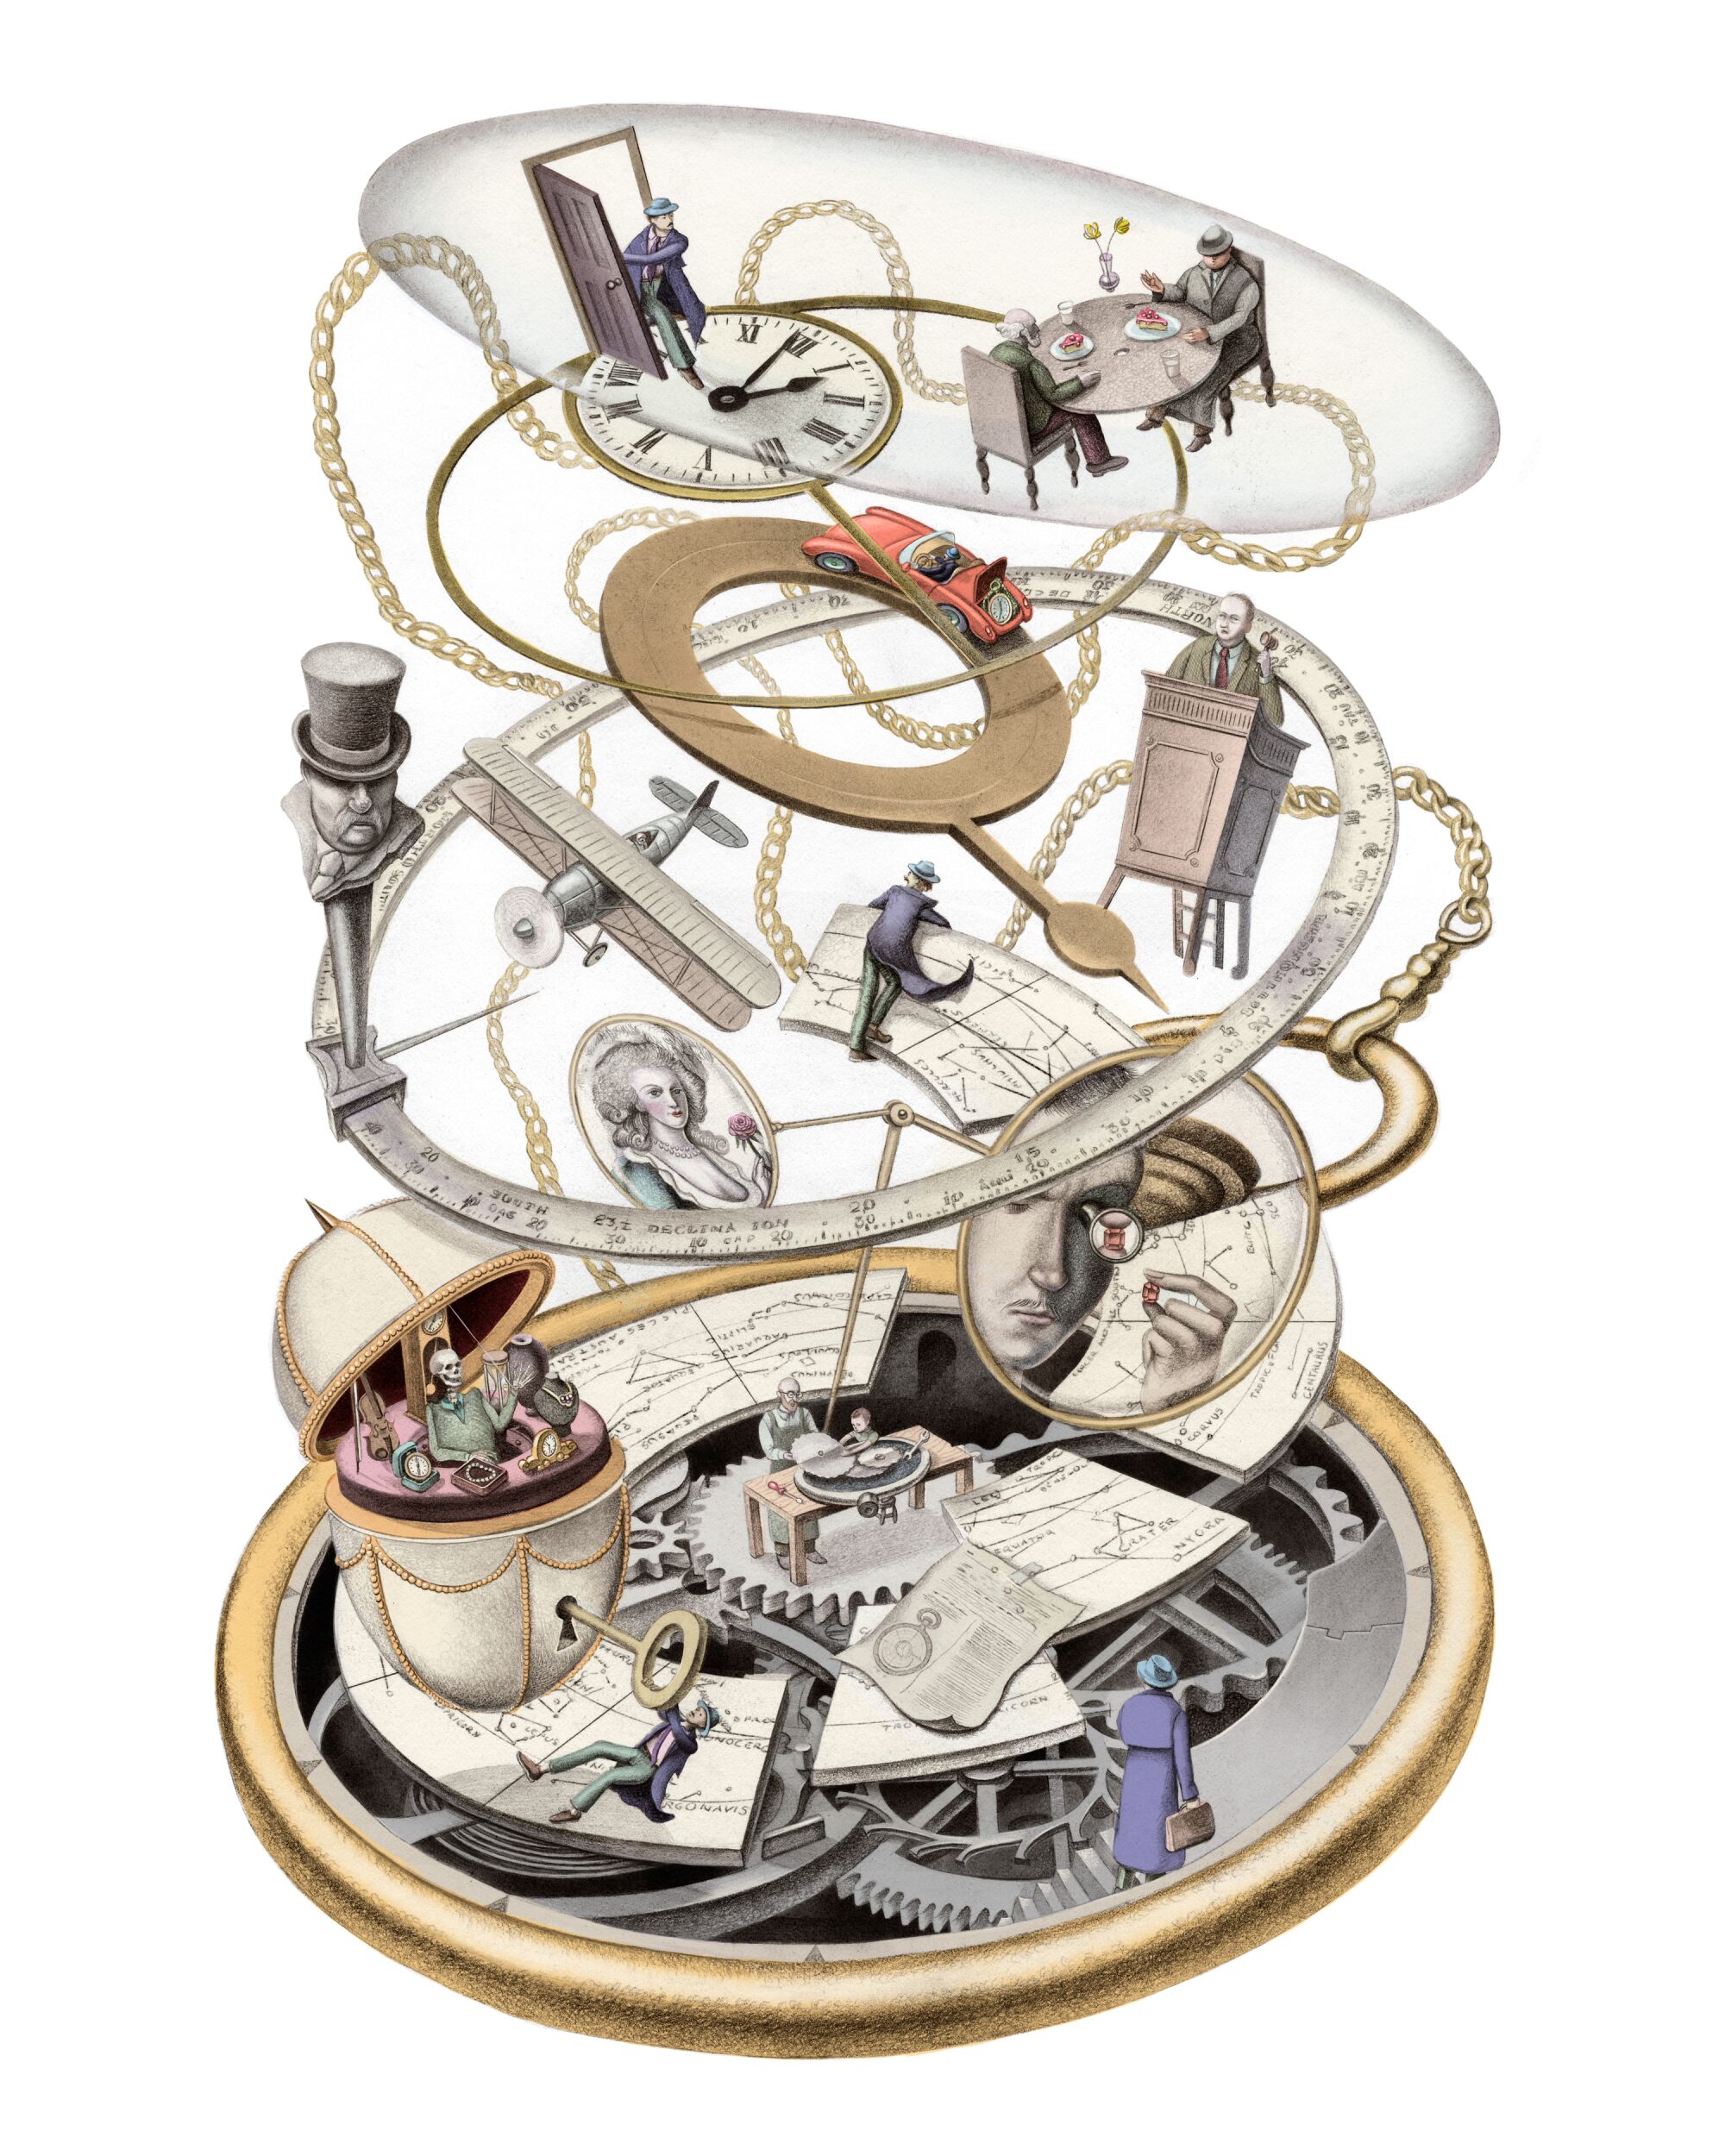 An illustration of a pocketwatch taken apart with narrative scenes located on each layer.